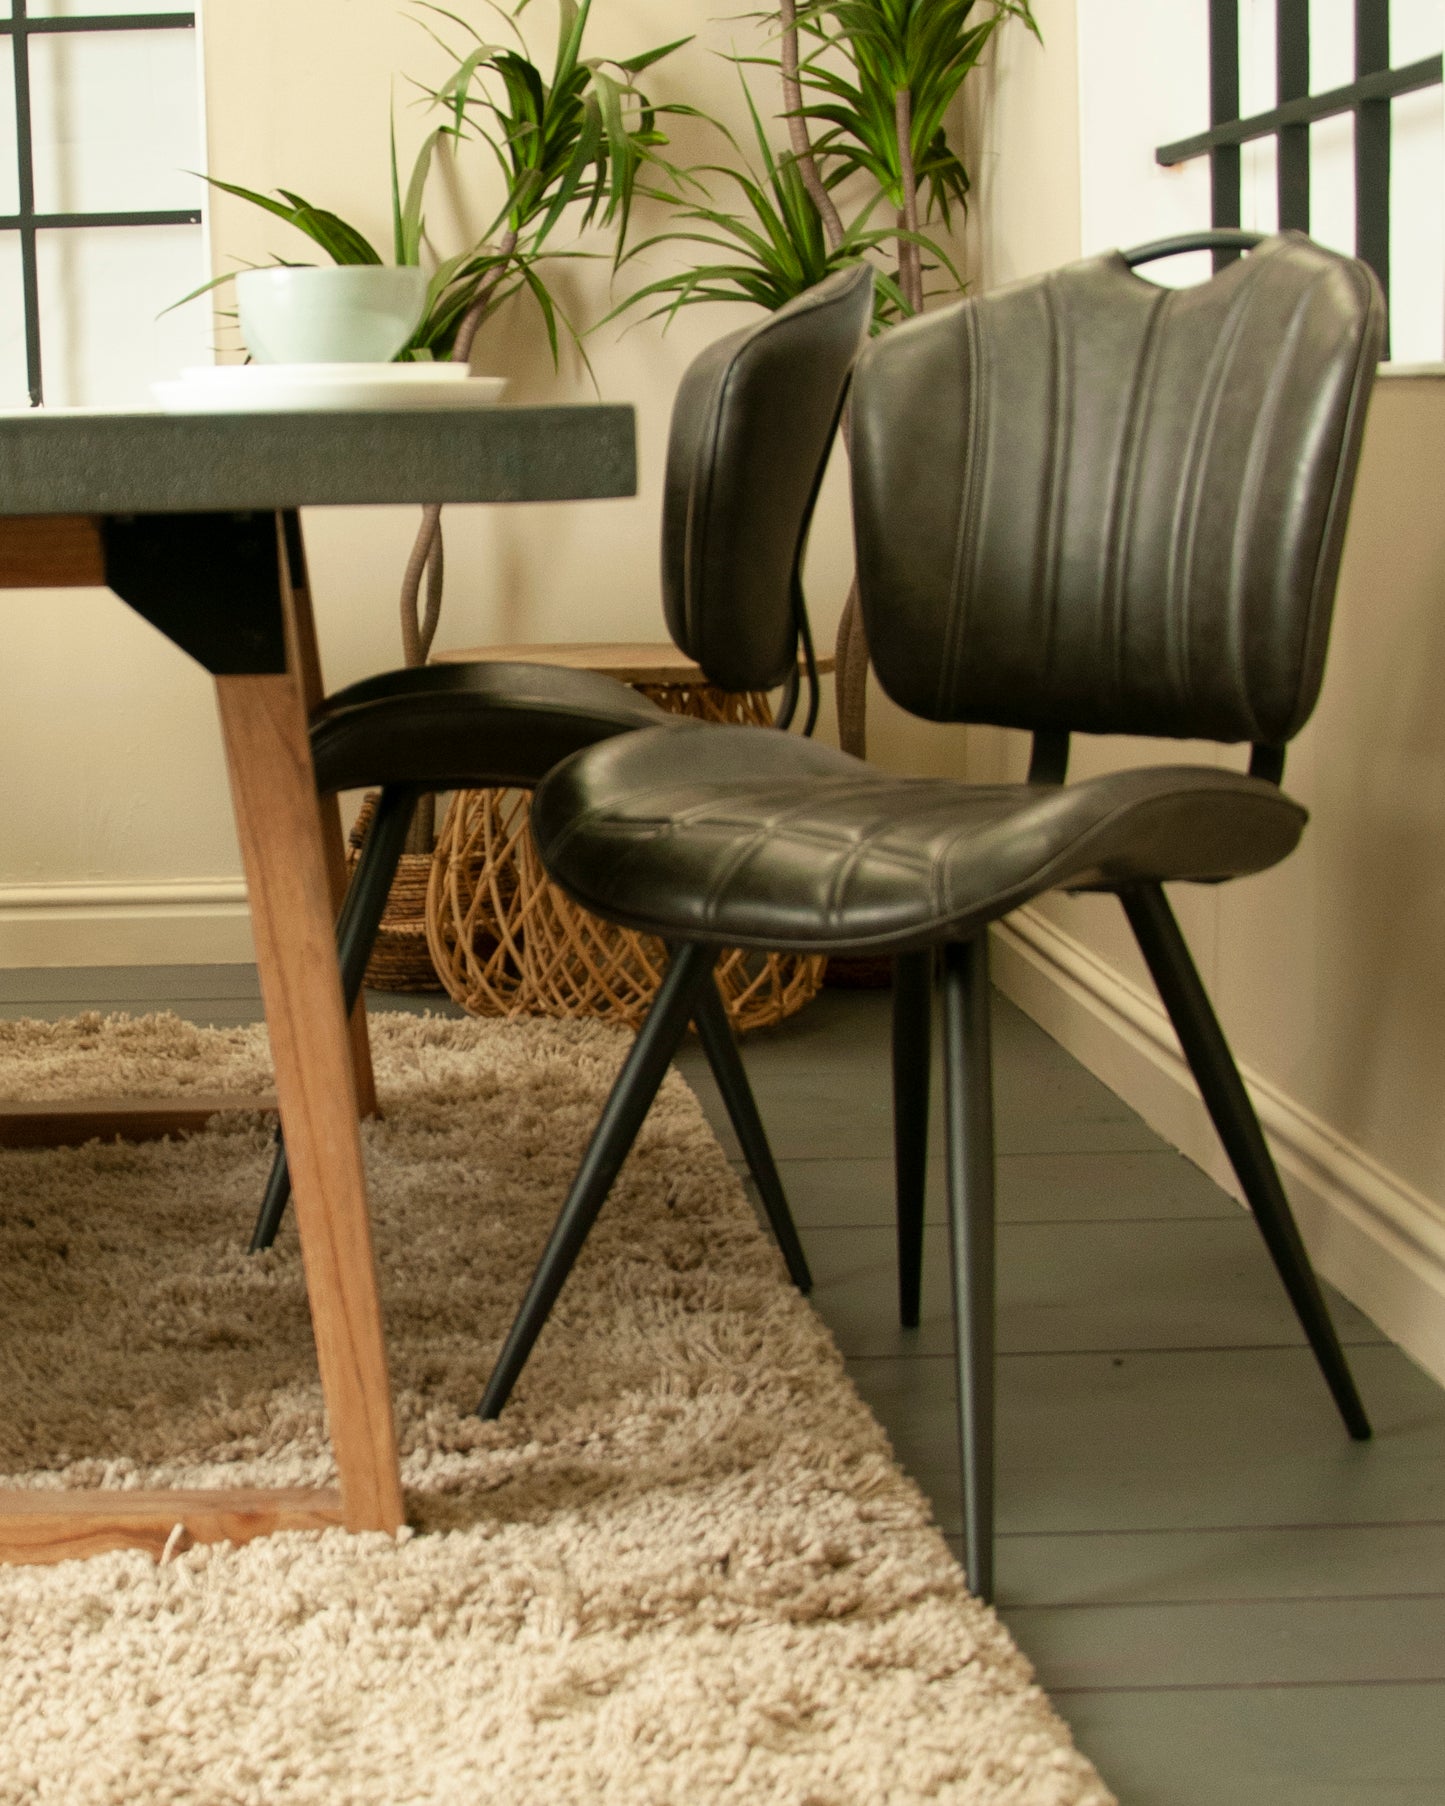 Healey Grey Vegan Leather Dining Chairs